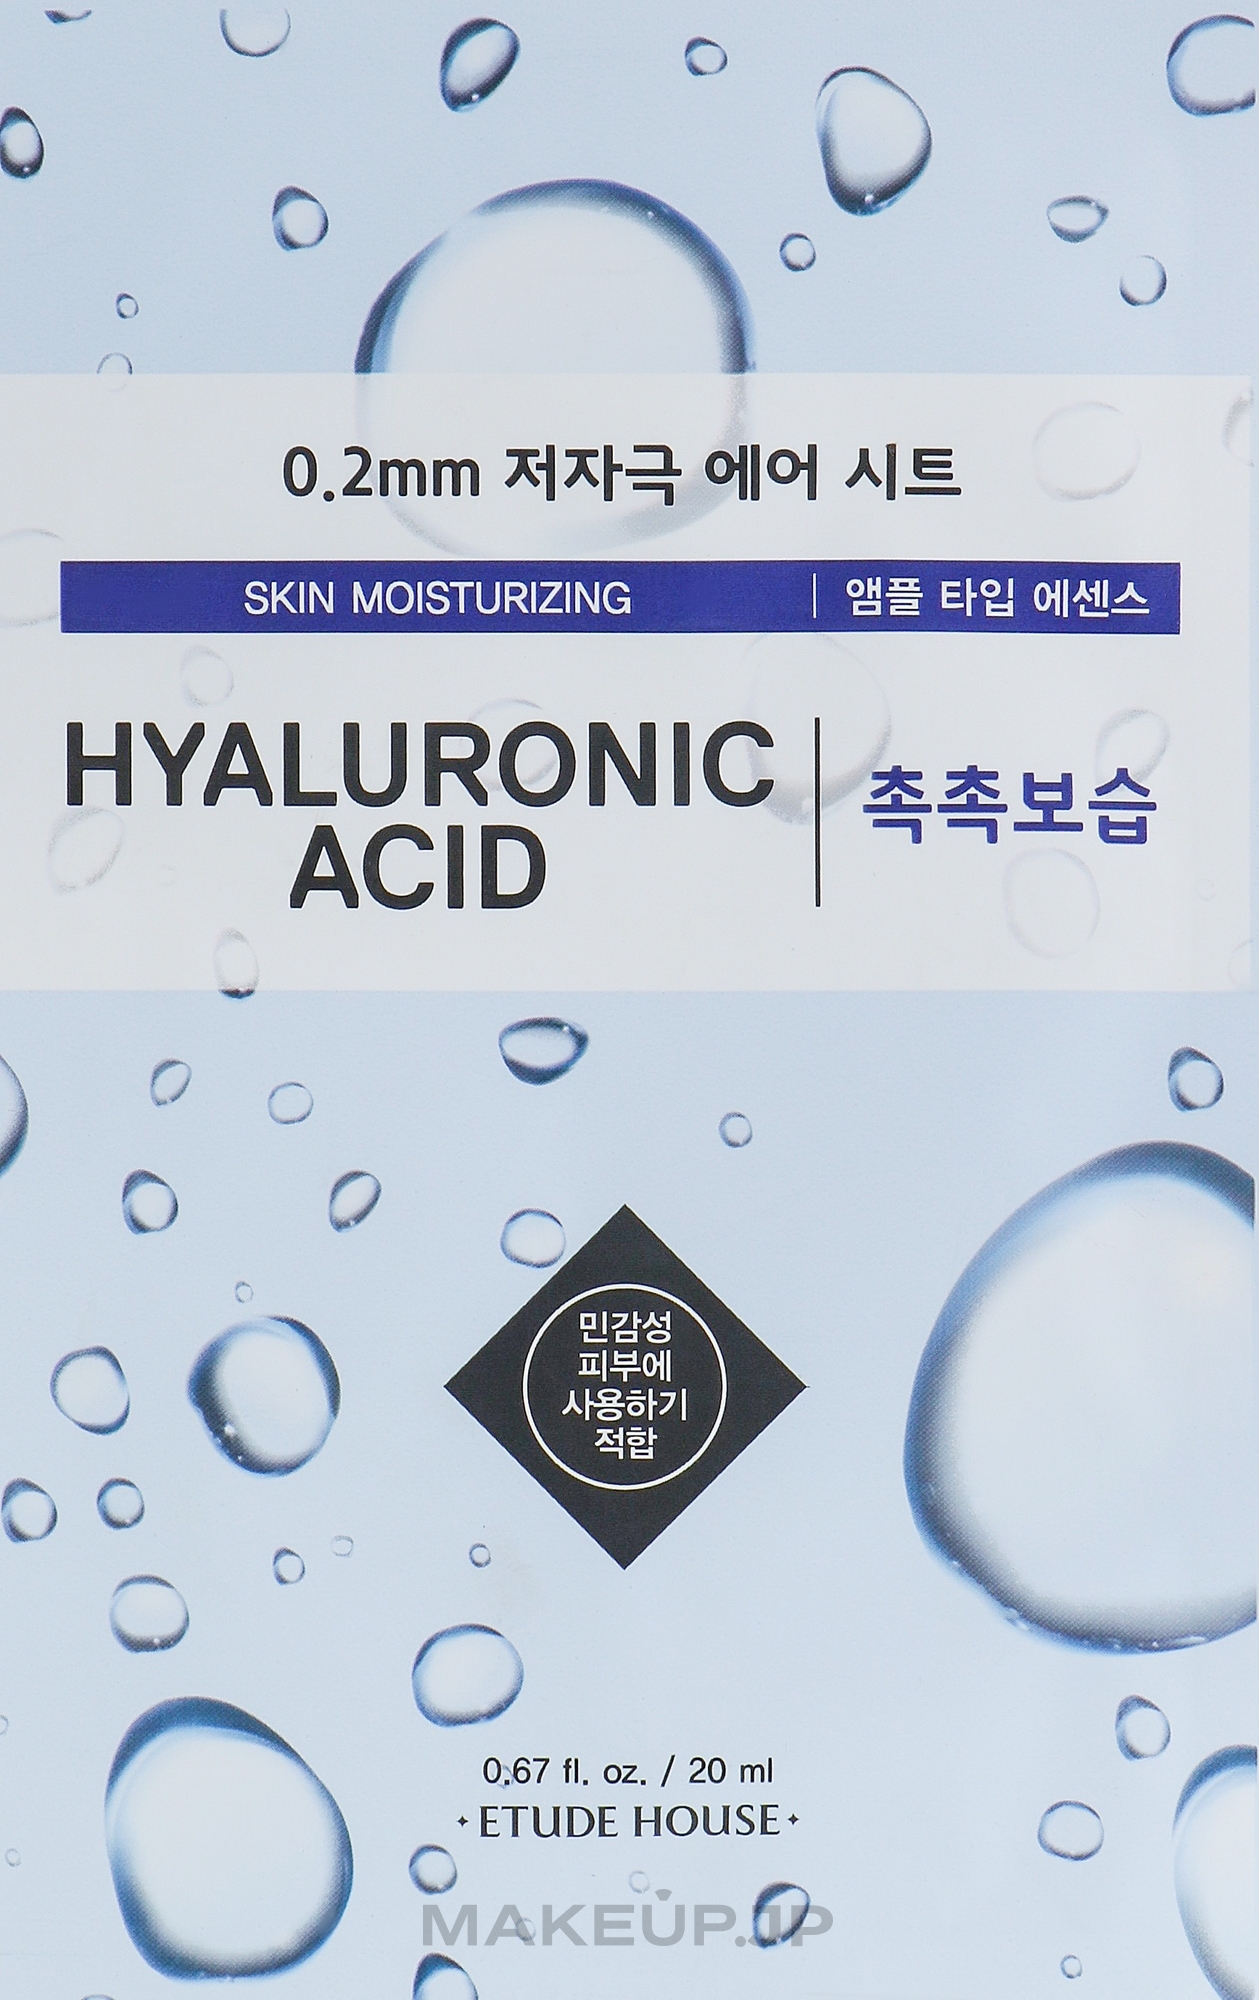 Ultra Thin Hyaluronic Acid Face Mask - Etude House Therapy Air Mask Hyaluronic Acid — photo 20 ml